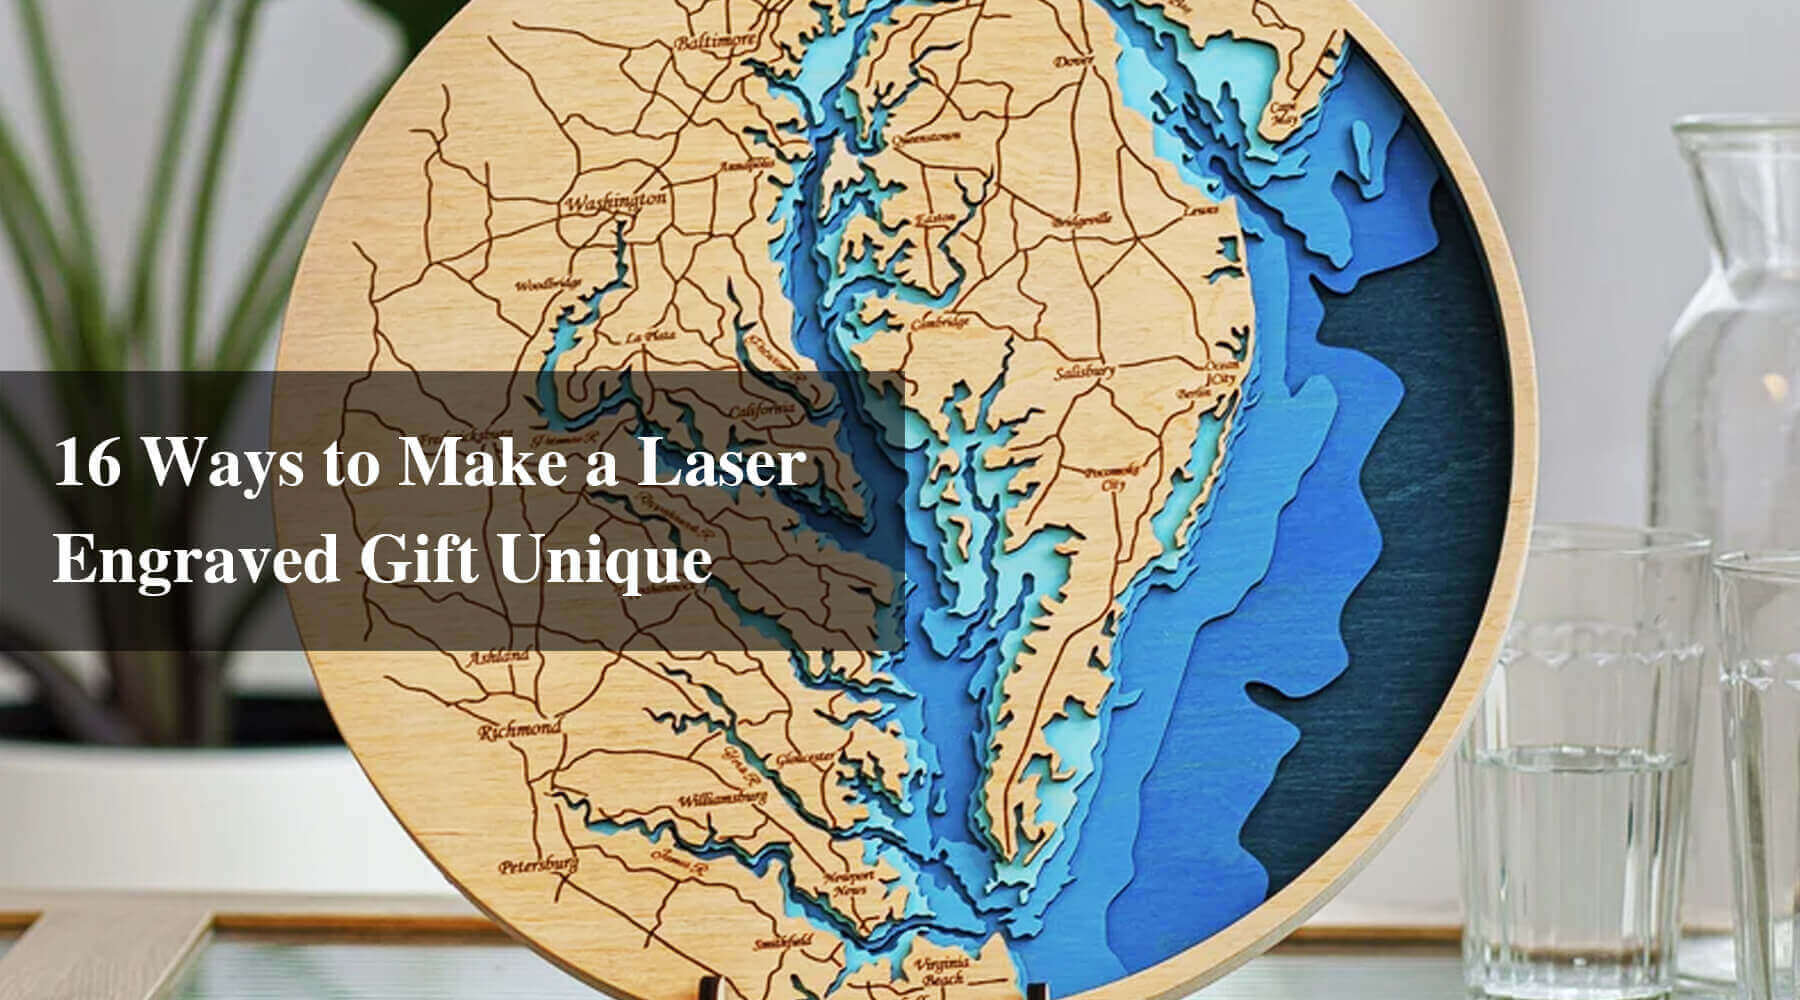 16 Ways to Make a Laser Engraved Gift Unique